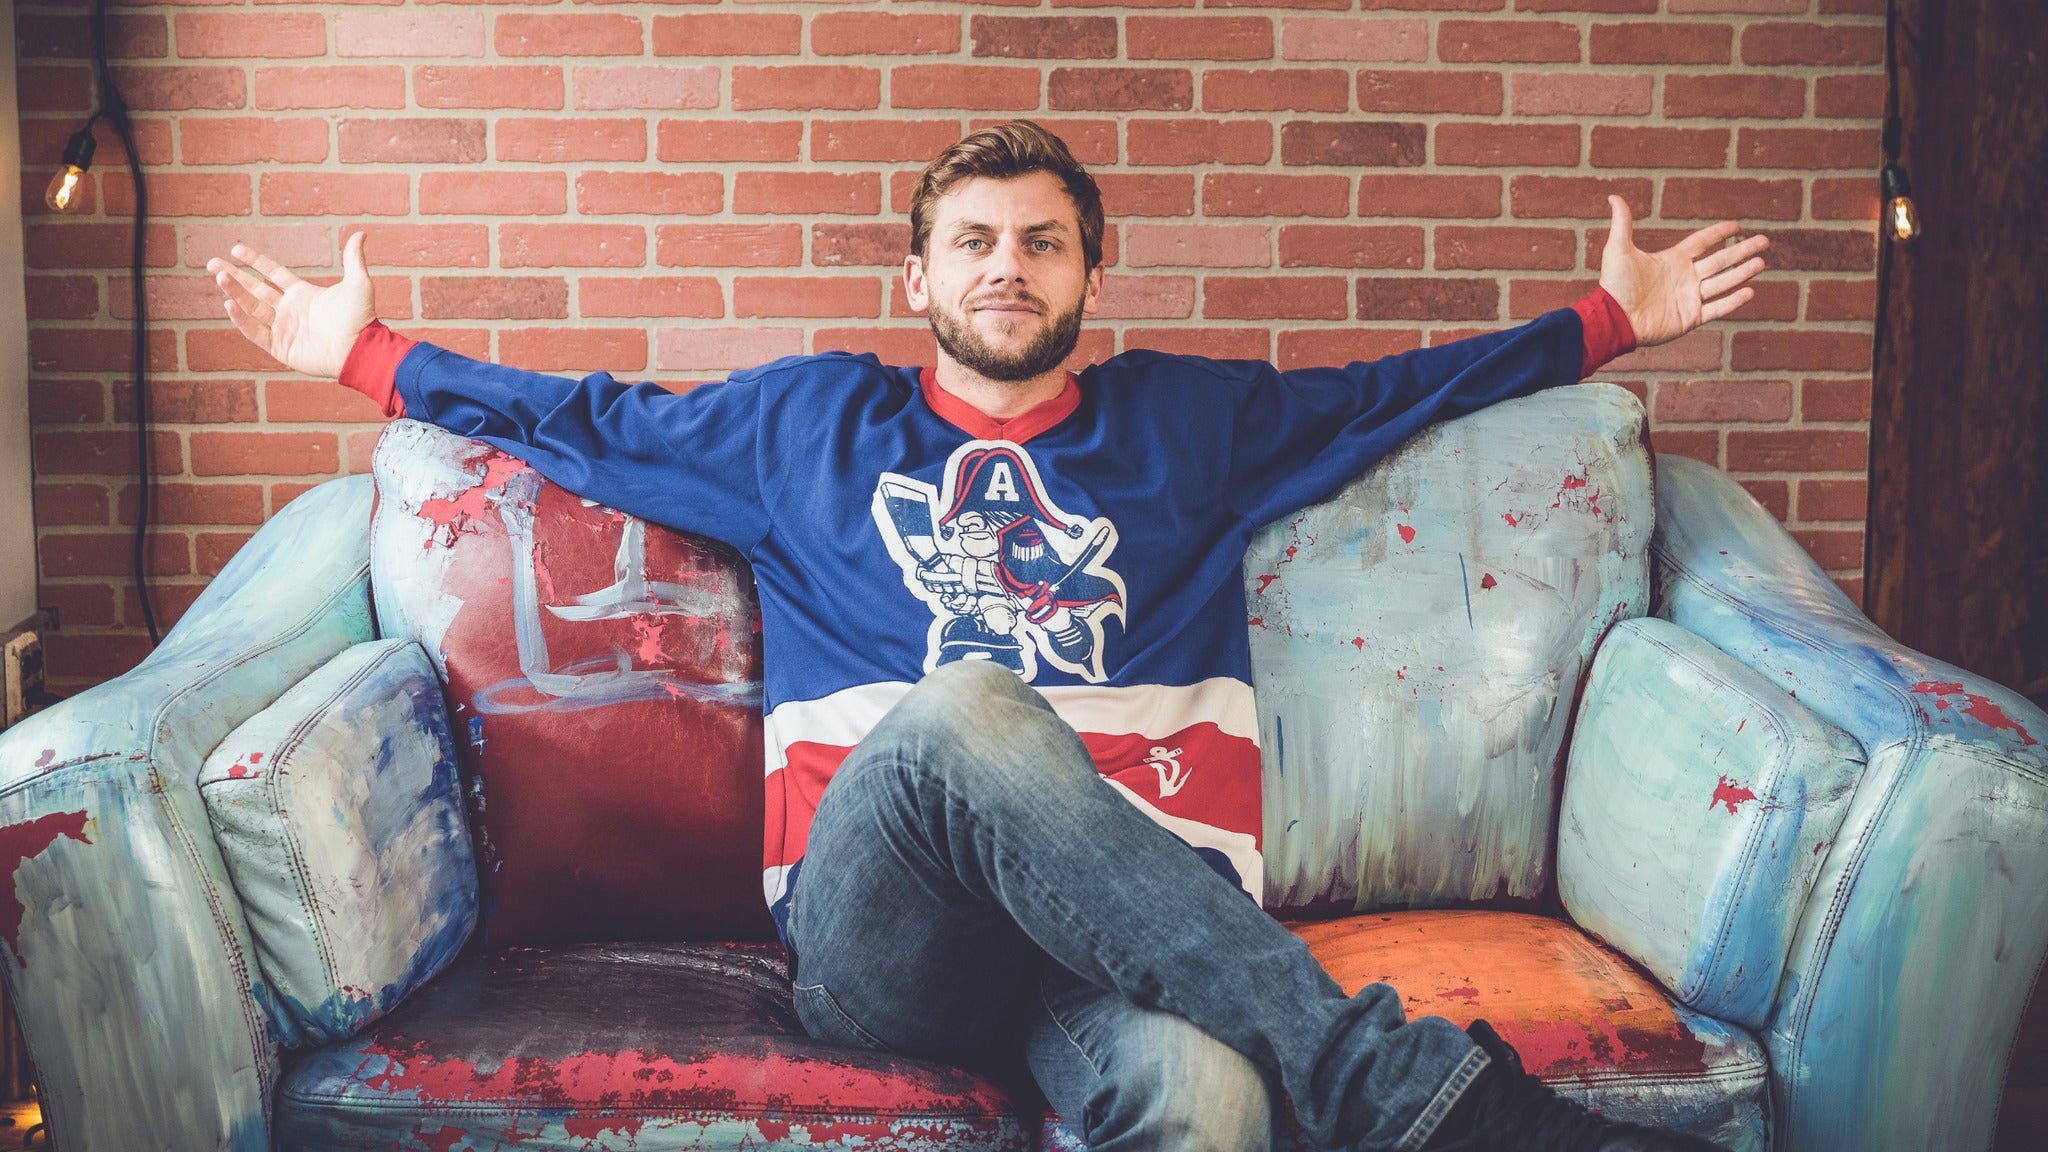 Charlie Berens in Madison promo photo for Promoter / Radio / Venue / Local presale offer code